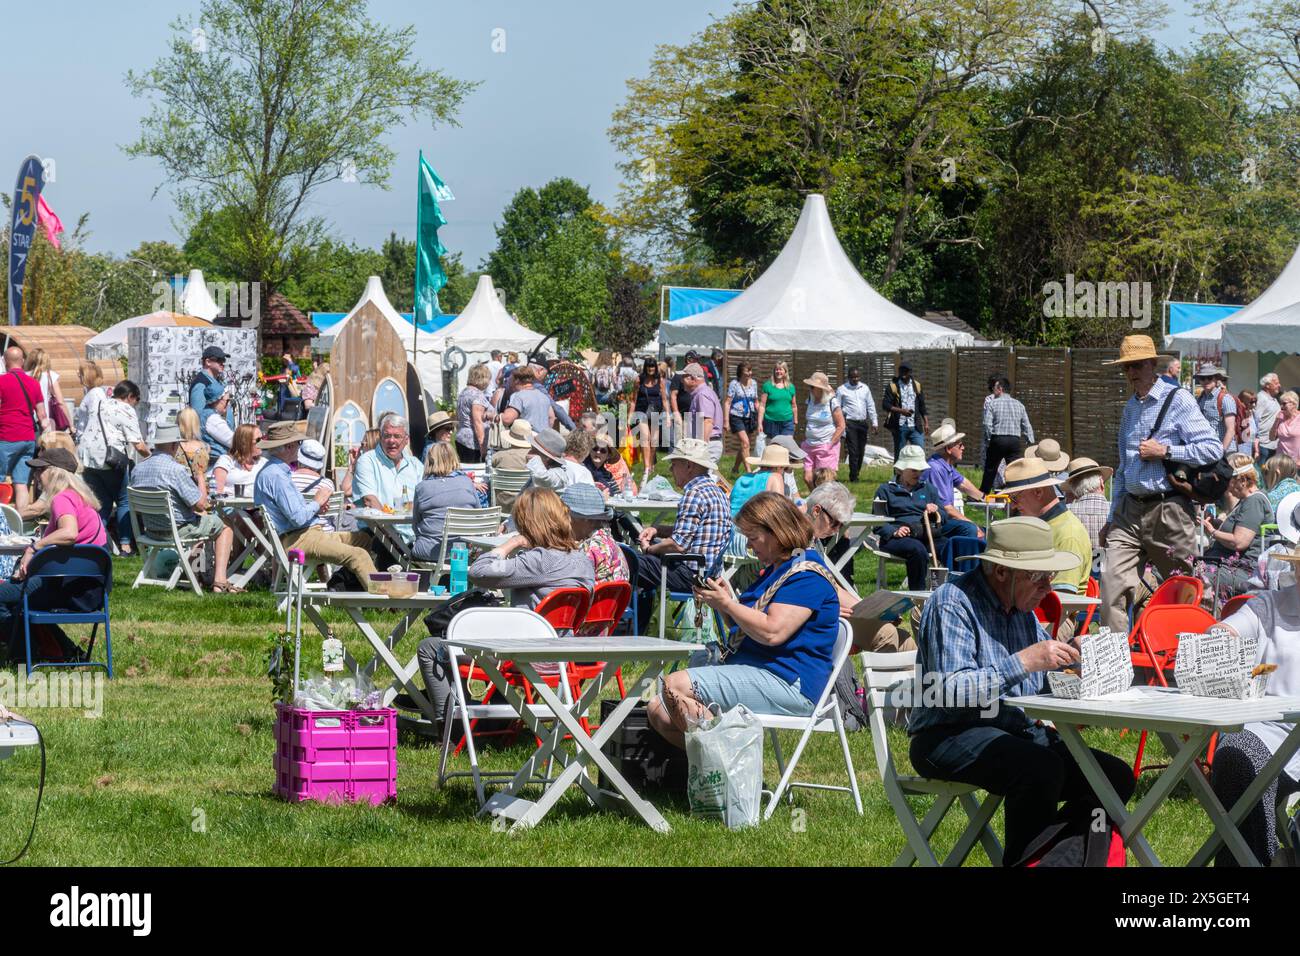 May 9th 2024. RHS Malvern Spring Festival opened today on a warm sunny day. Thousands of visitors attended the annual flower show at the Three Counties Showground in Malvern, Worcestershire, England, UK. The event is held over 4 days, ending on the 12th May 2024. Stock Photo